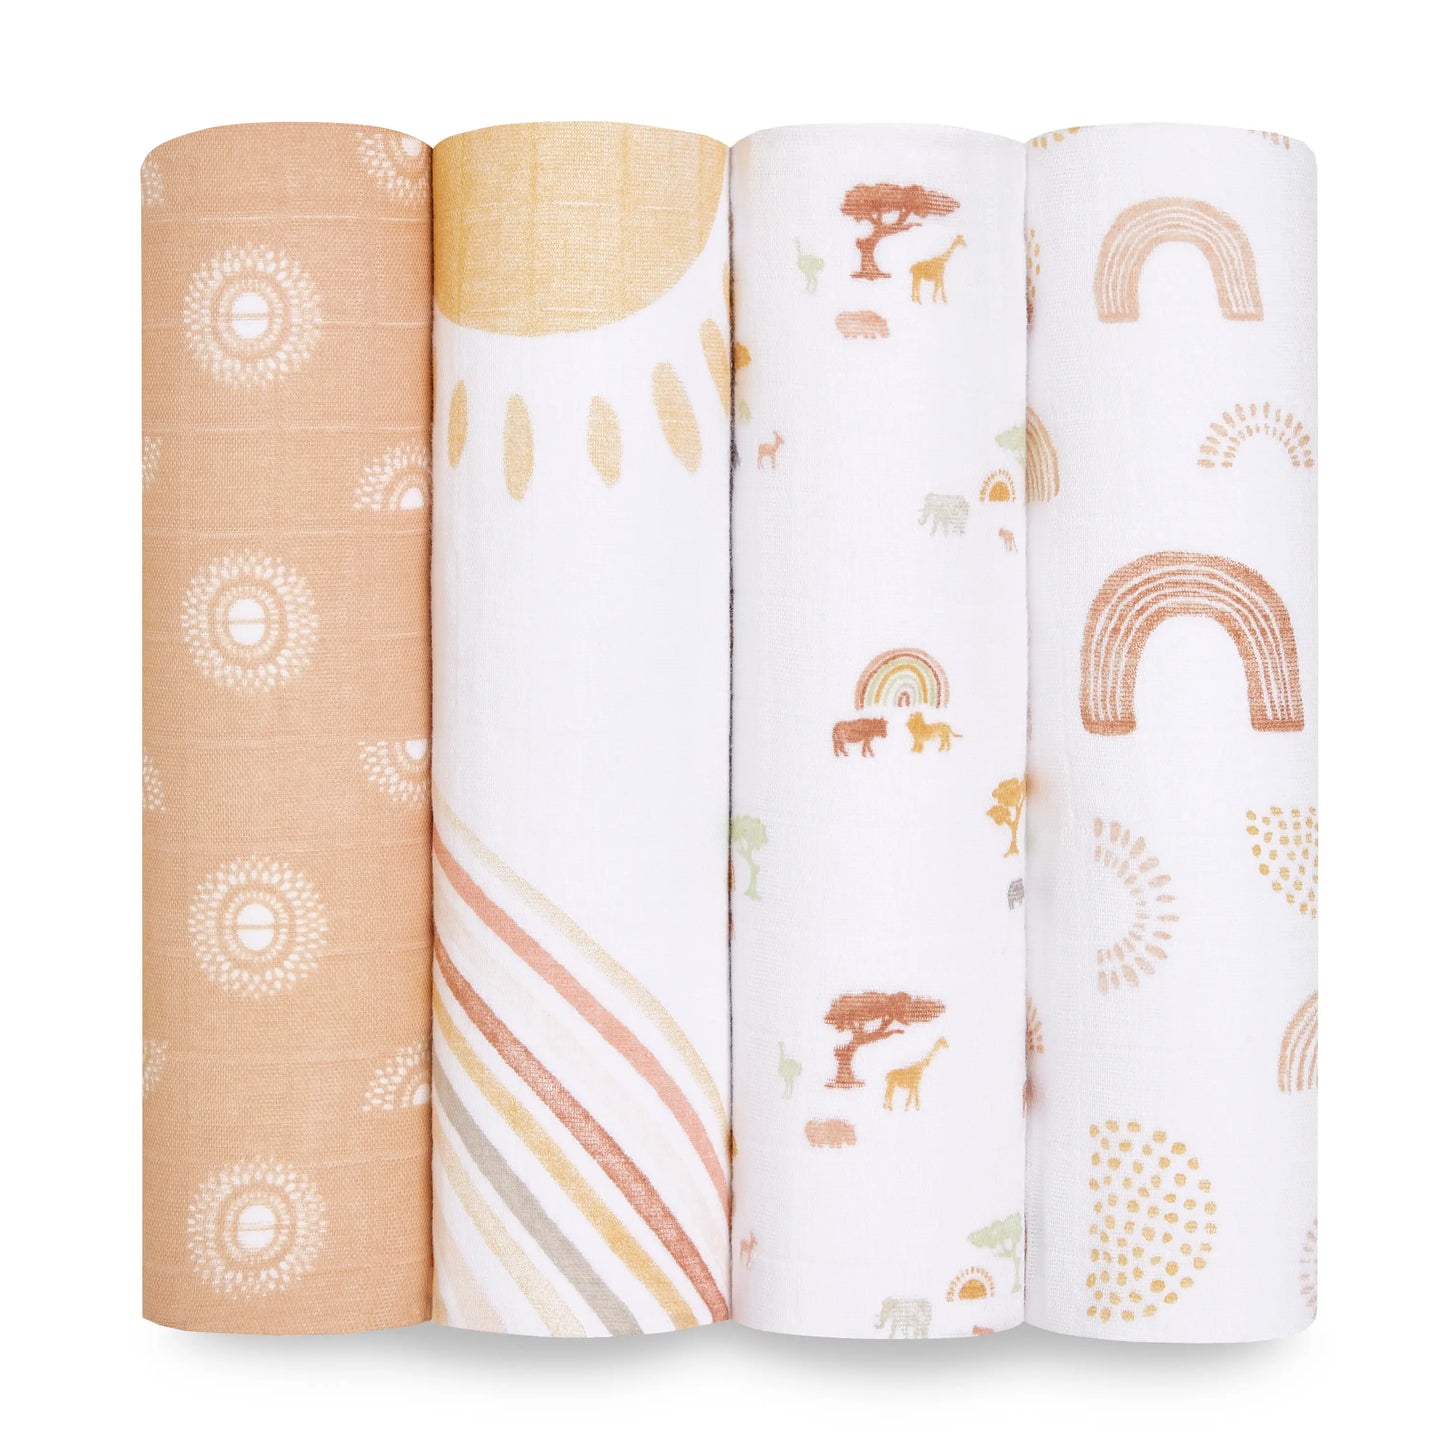 Keep Rising Swaddles 4-Pack